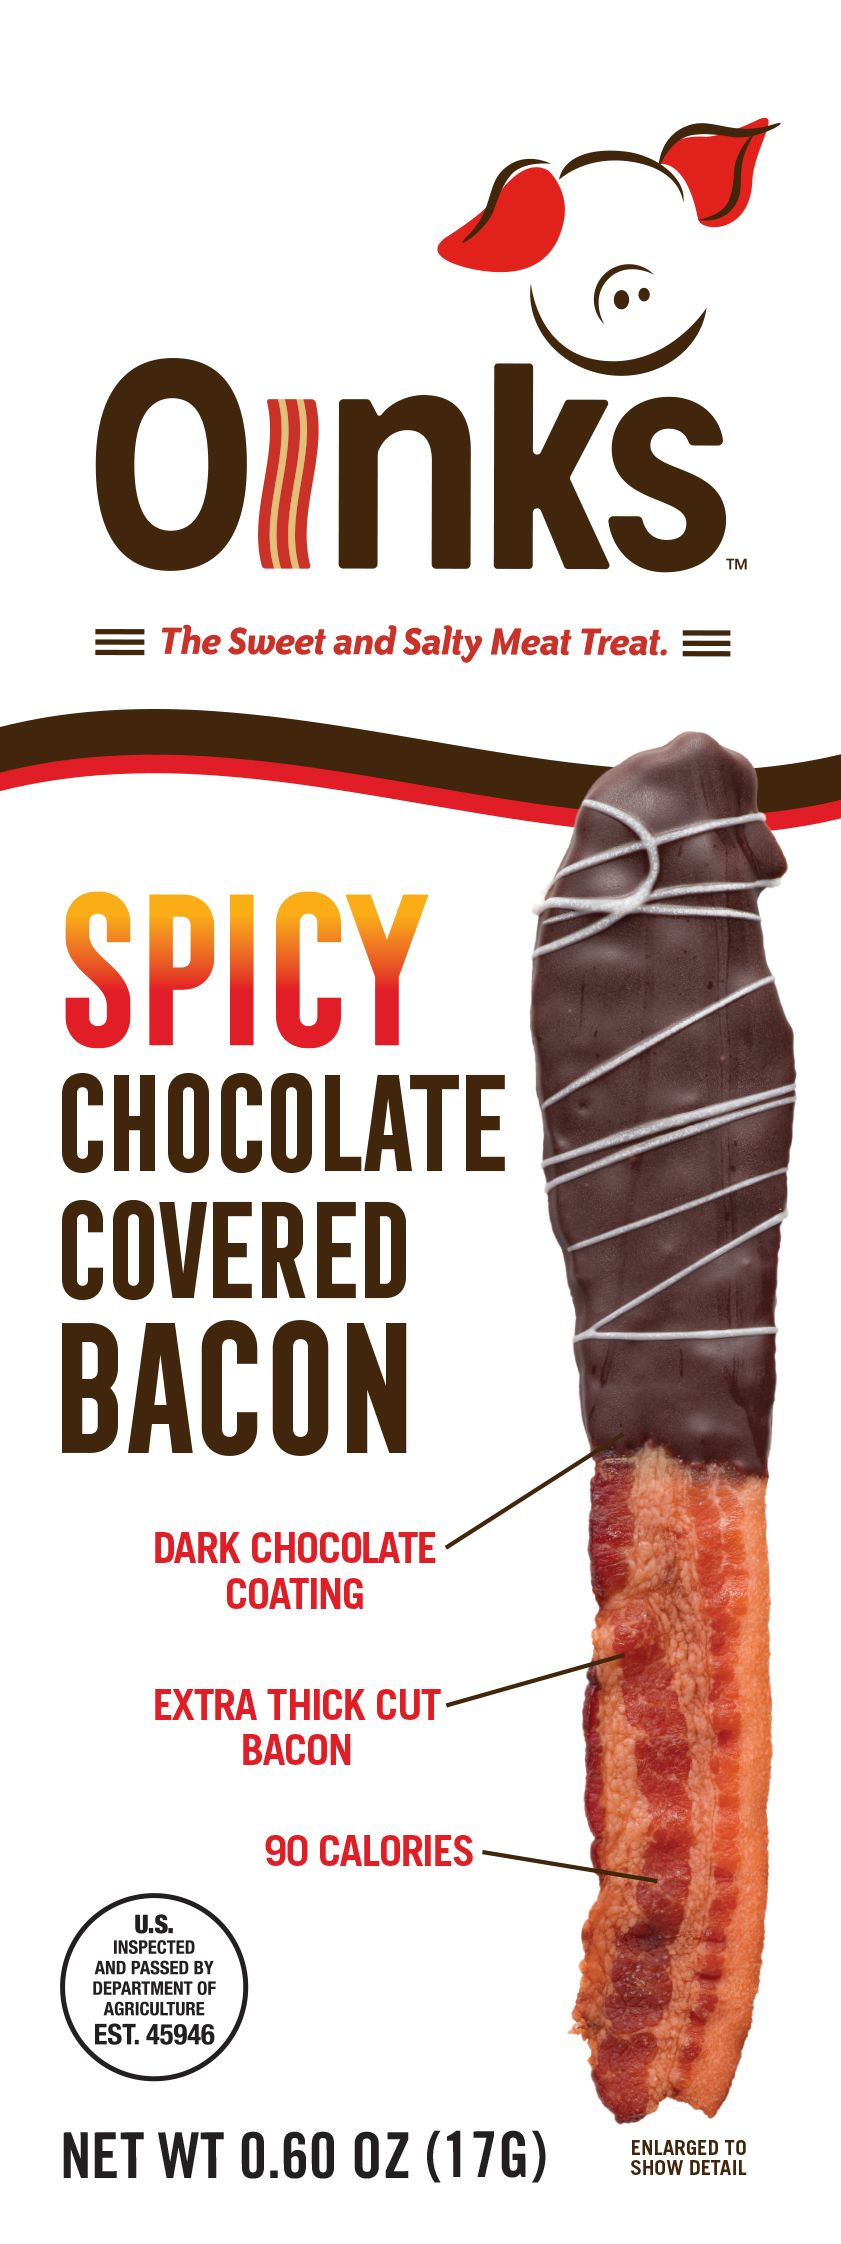 Picture of Genesee Candy Land SSQ-5228J 0.5 oz Oinks Spicy Chocolate Covered Bacon - 16 Pieces